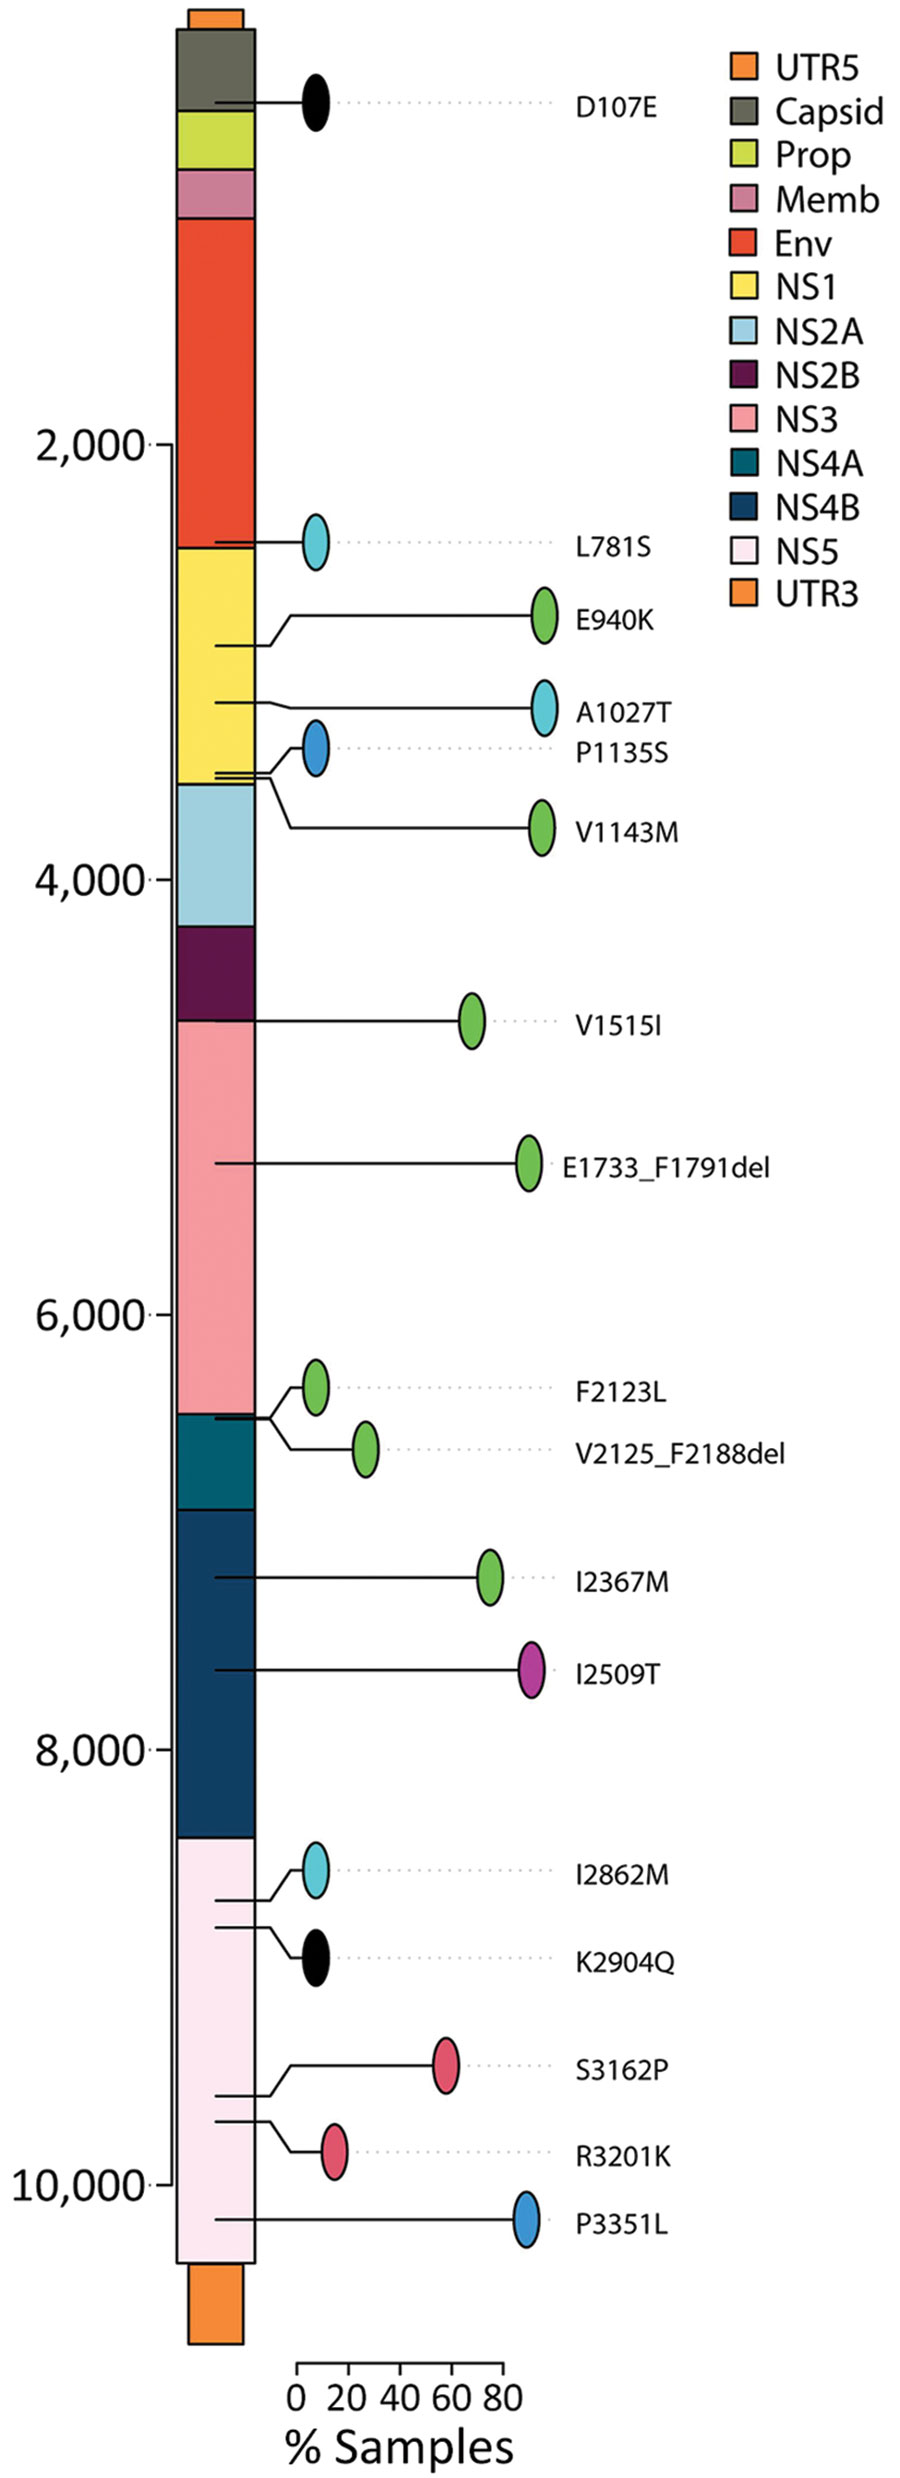 Single-nucleotide variants per gene for Zika virus strains obtained from study participants in northern Brazil. Amino acid changes in the polyprotein are allocated along the genome. Only mutations that appear in >10% (lines) of sequences are shown. Env, envelope; Prop, propeptide; Memb, membrane; NS, nonstructural; UTR, untranslated region.